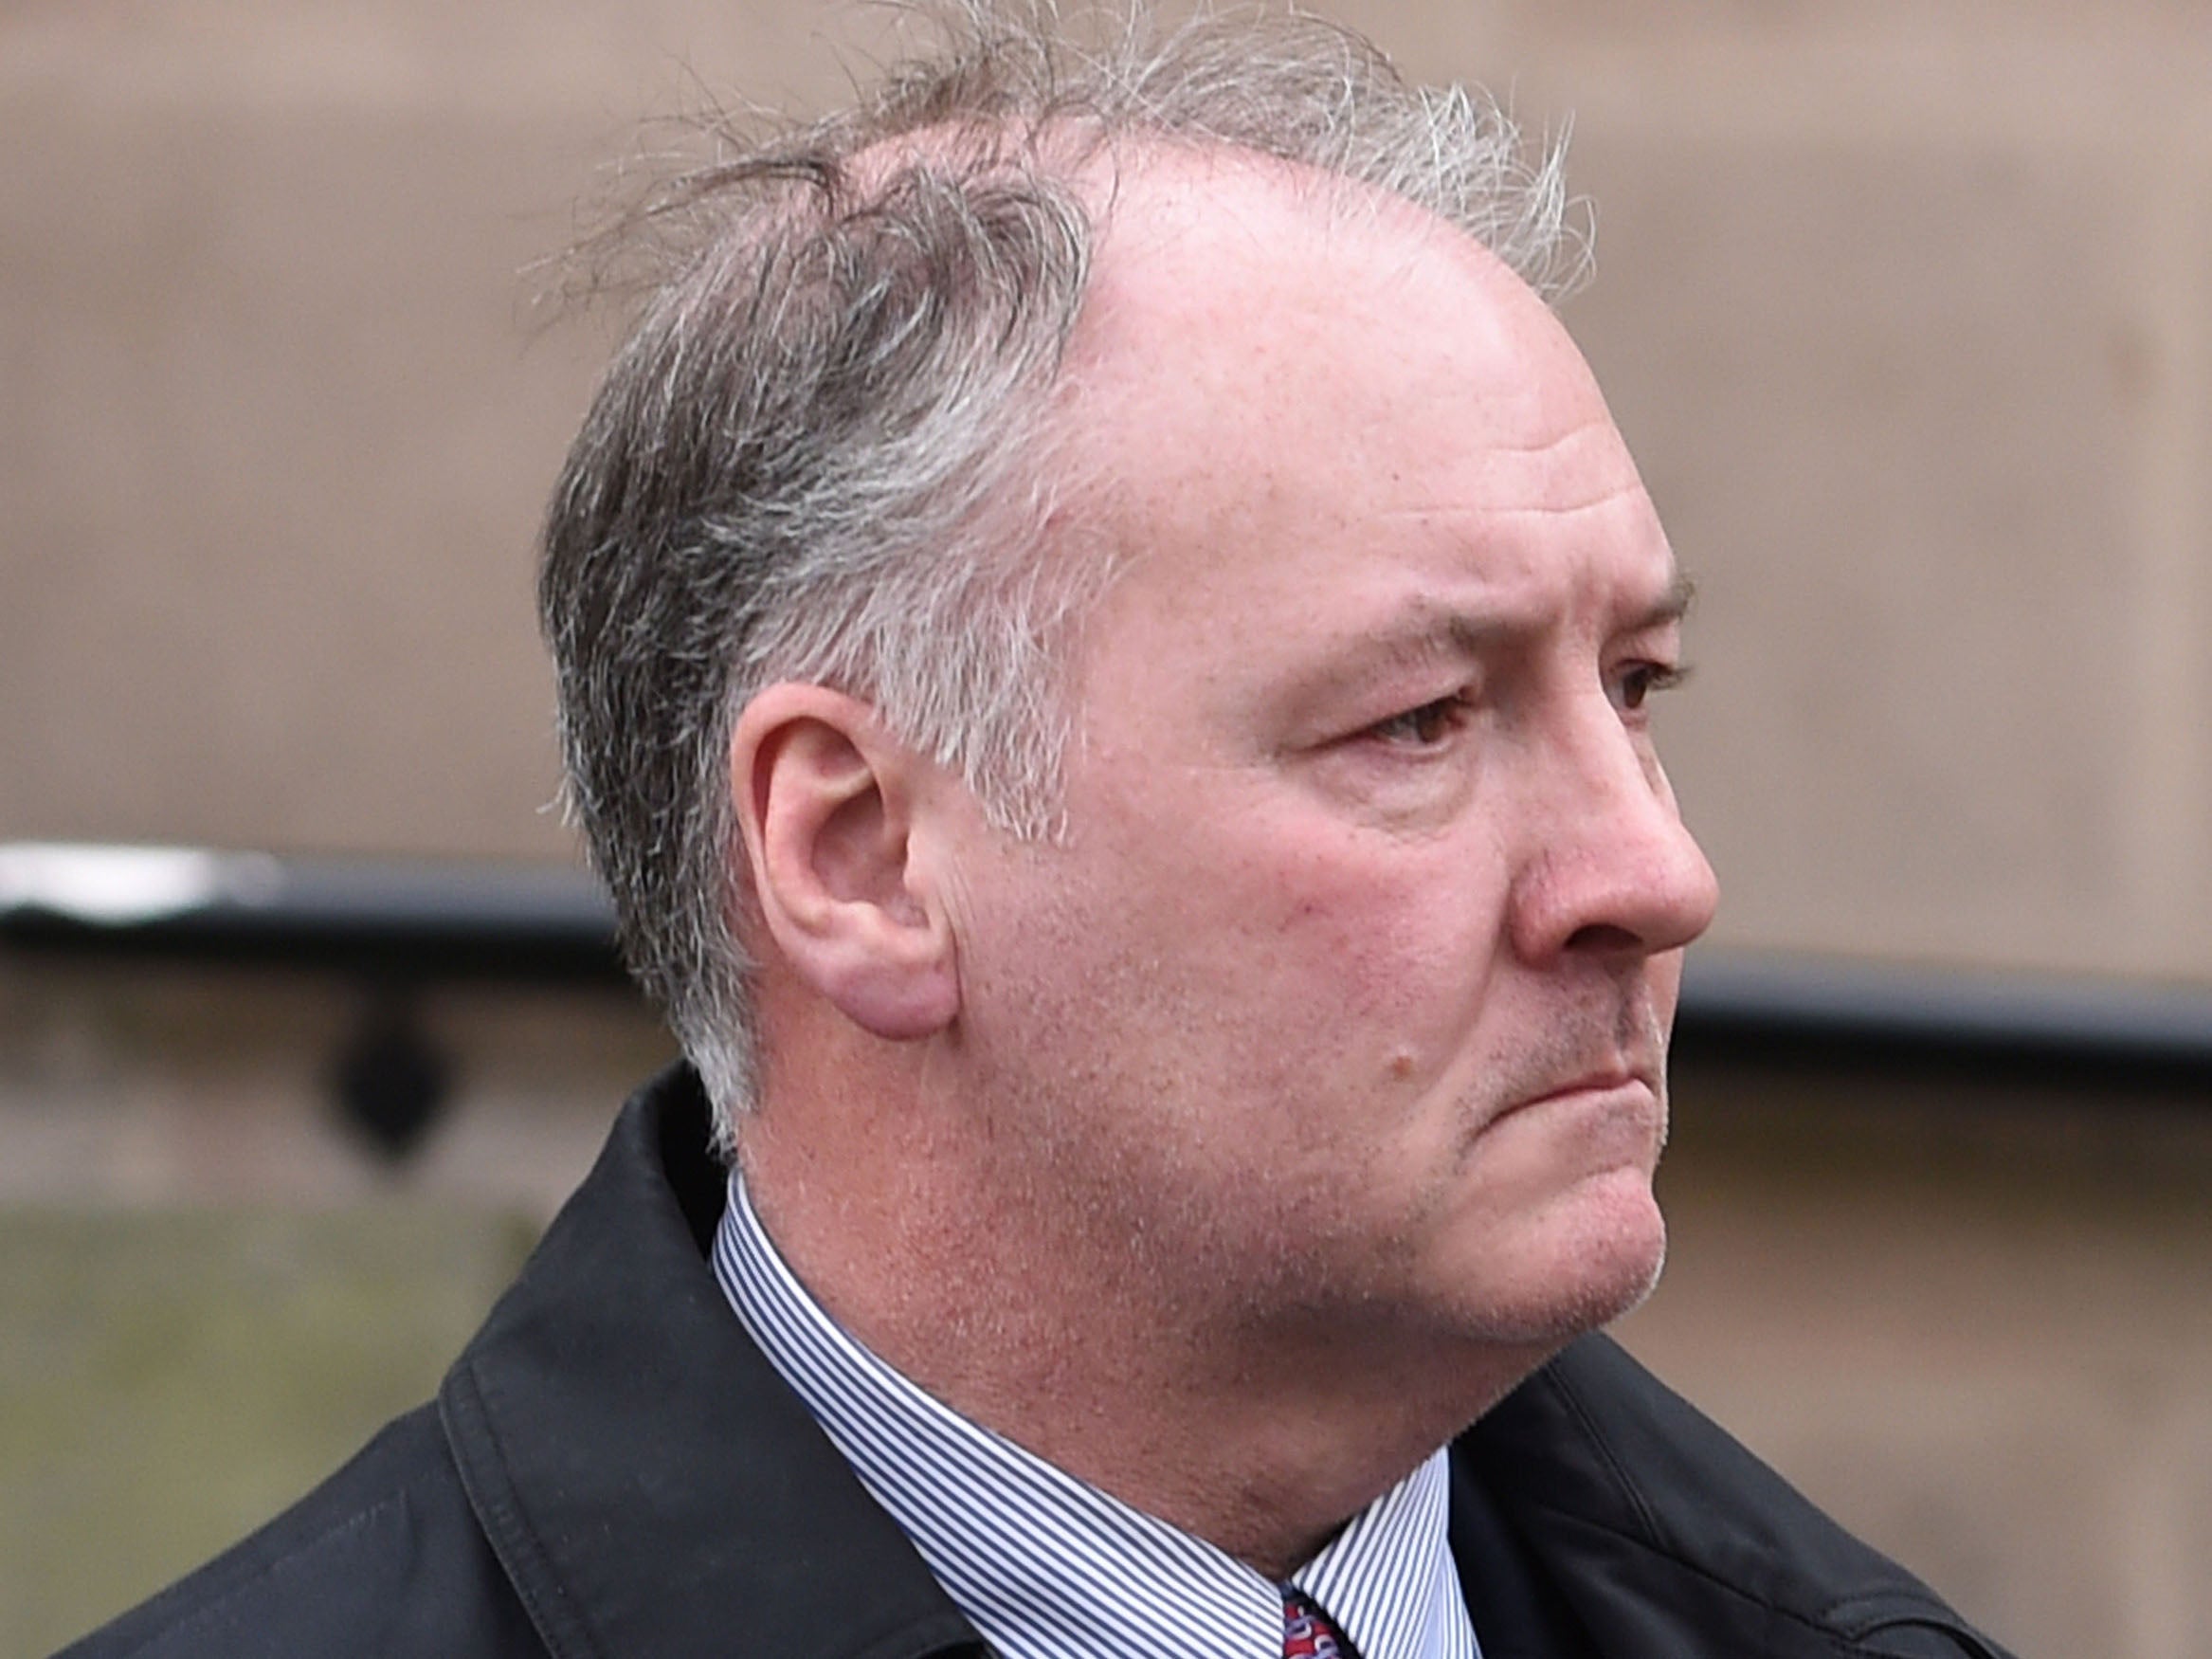 Ian Paterson sobbed as the foreman of the jury returned the guilty verdicts